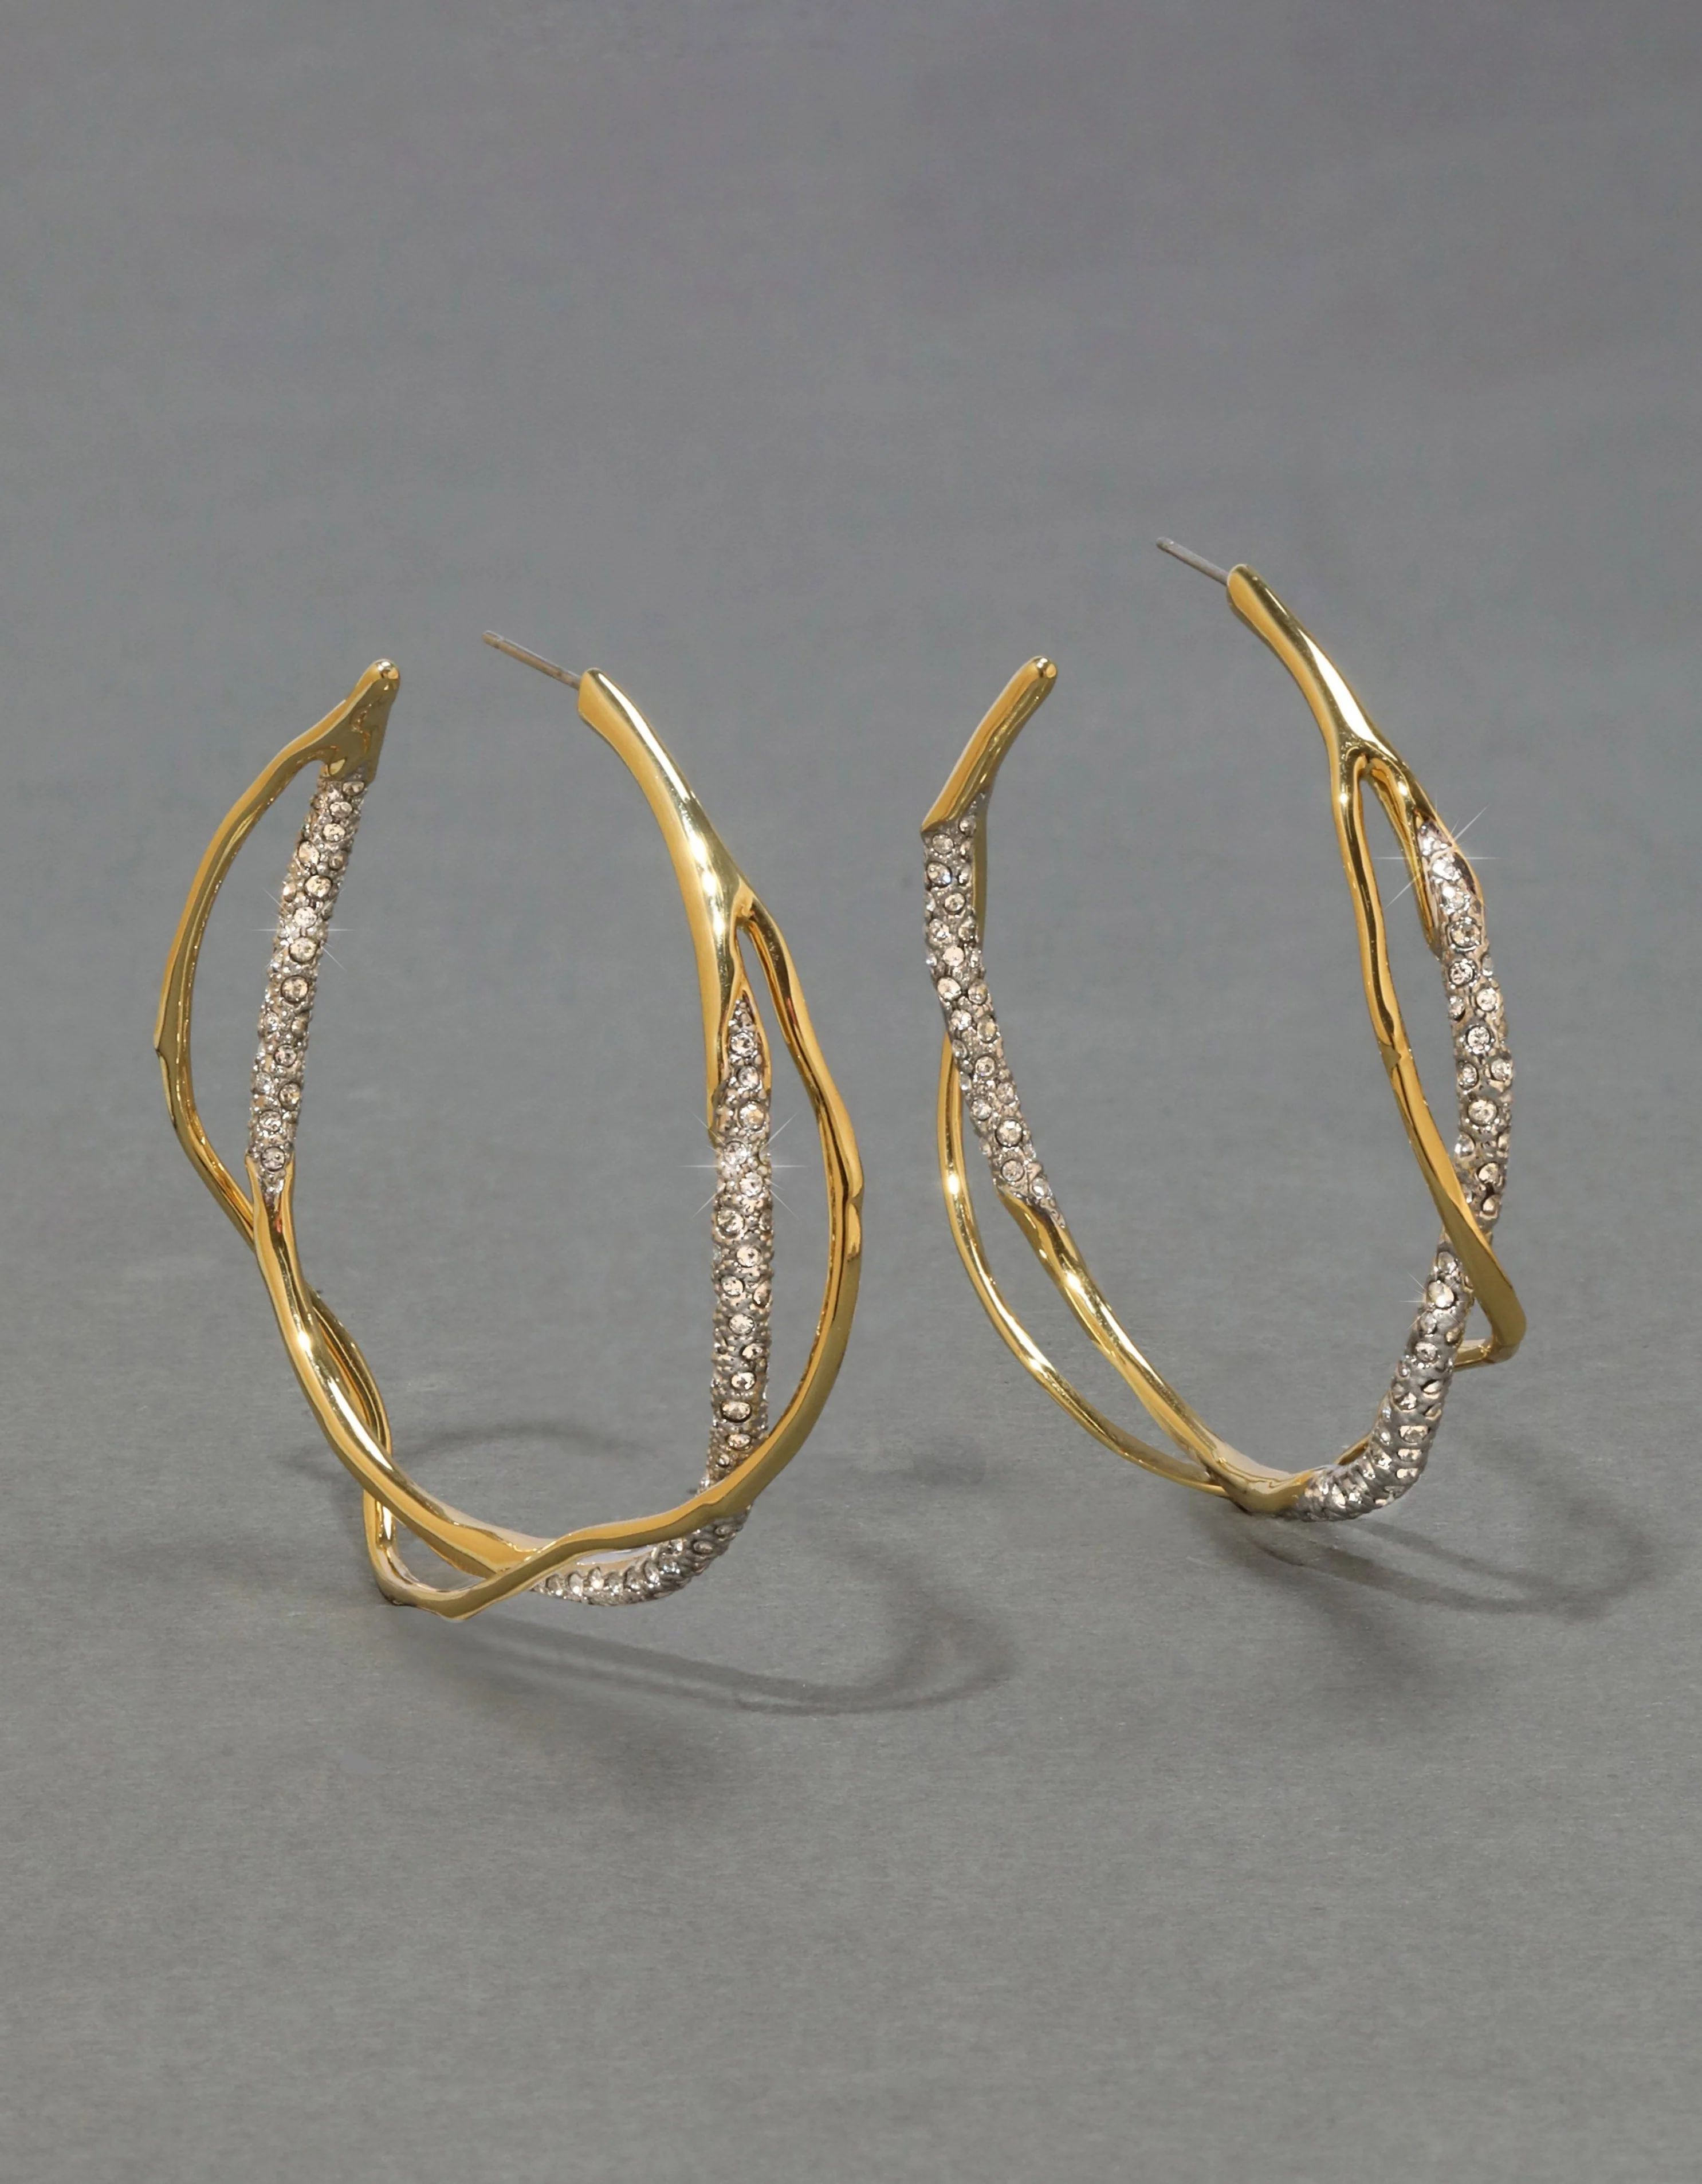 Intertwined Two Tone Pave Hoop Earring | ALEXIS BITTAR | Alexis Bittar